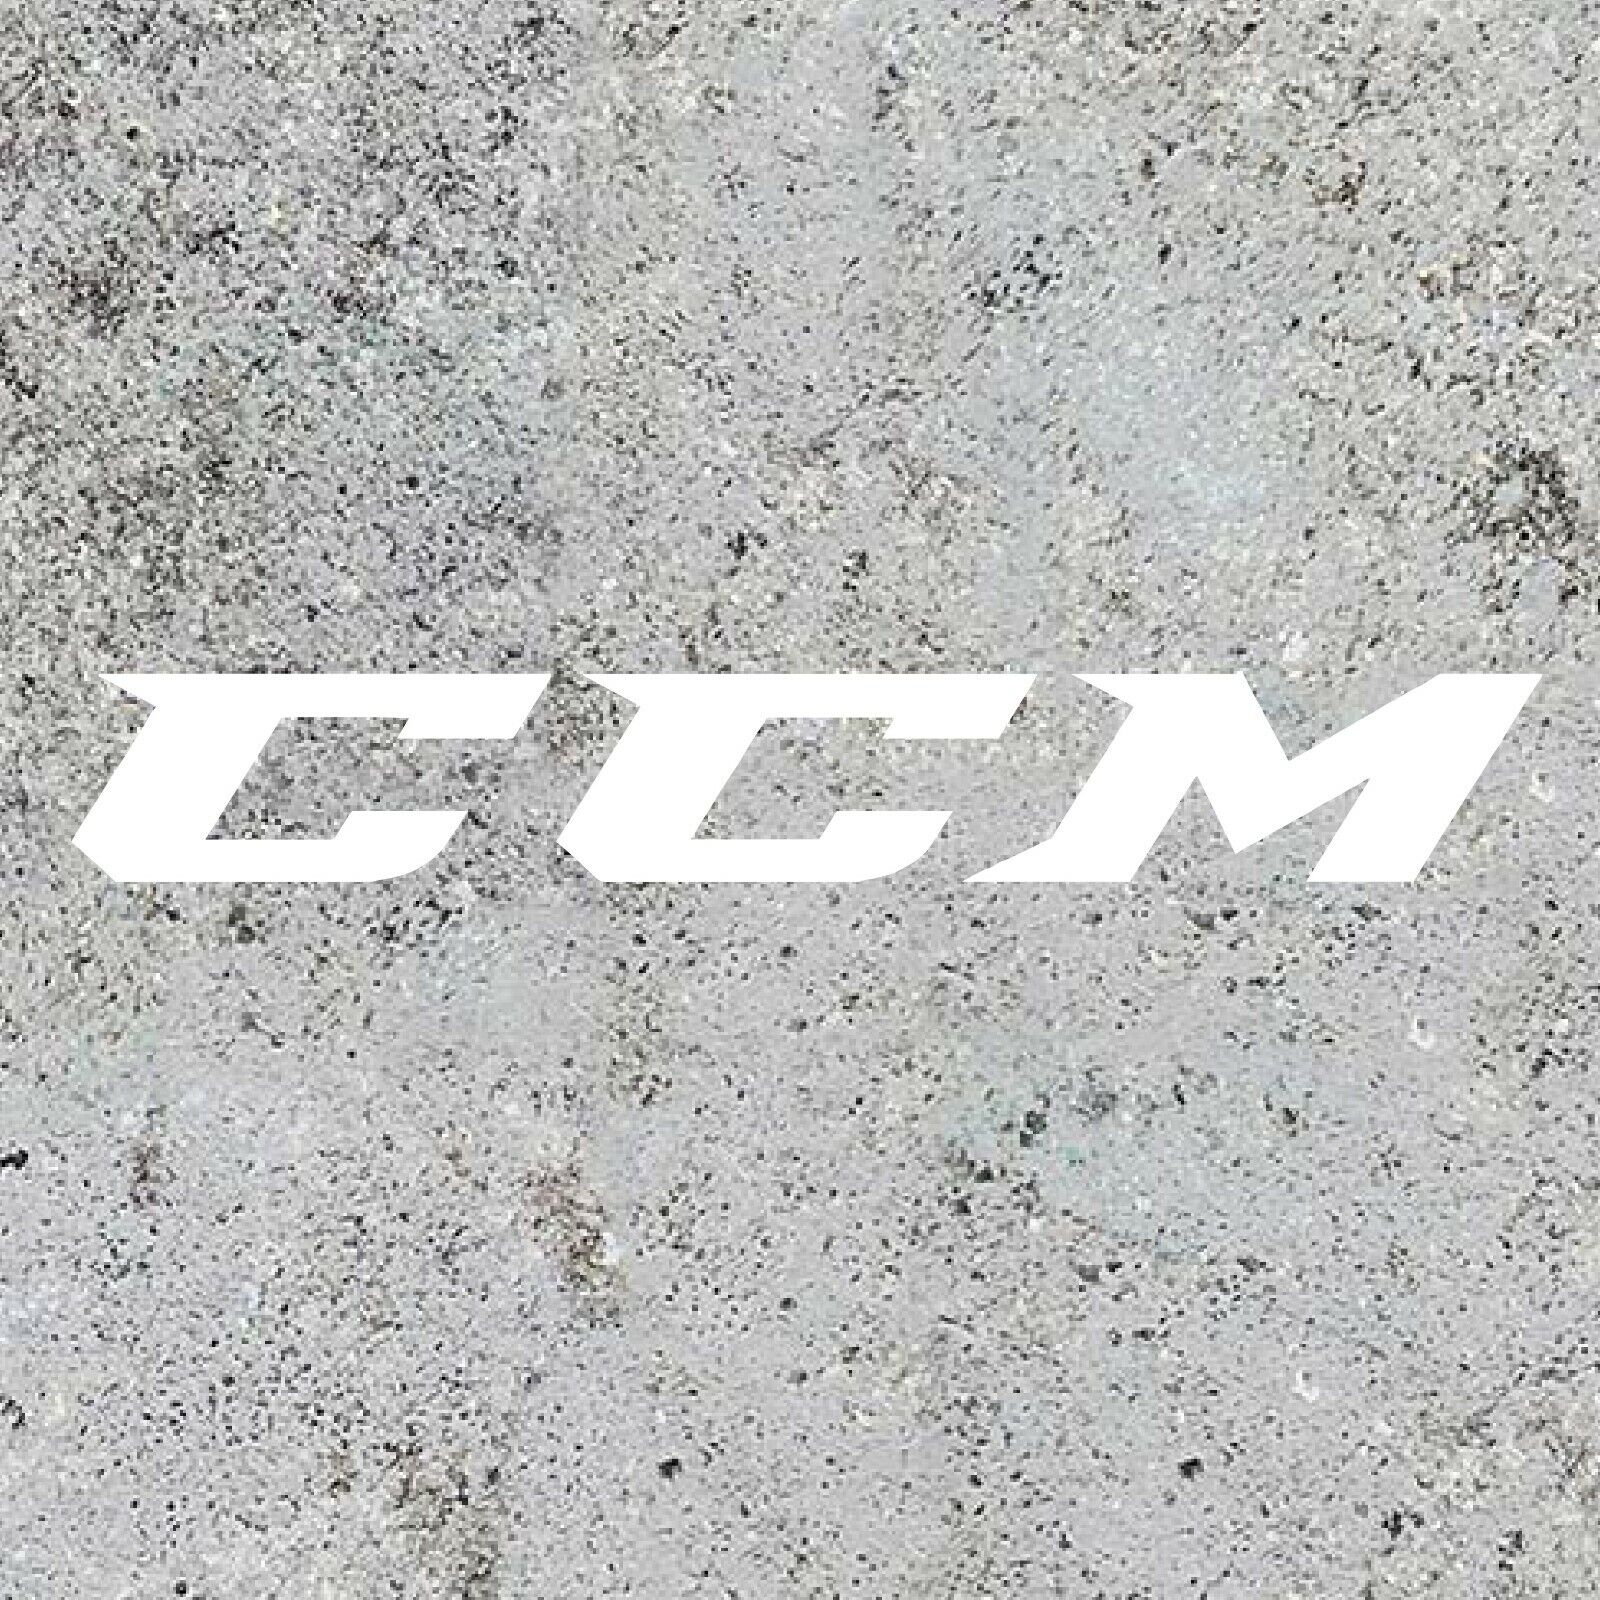 CCM Hockey Decal. ASSORTED SIZE AND COLOR Options. High Quality Vinyl